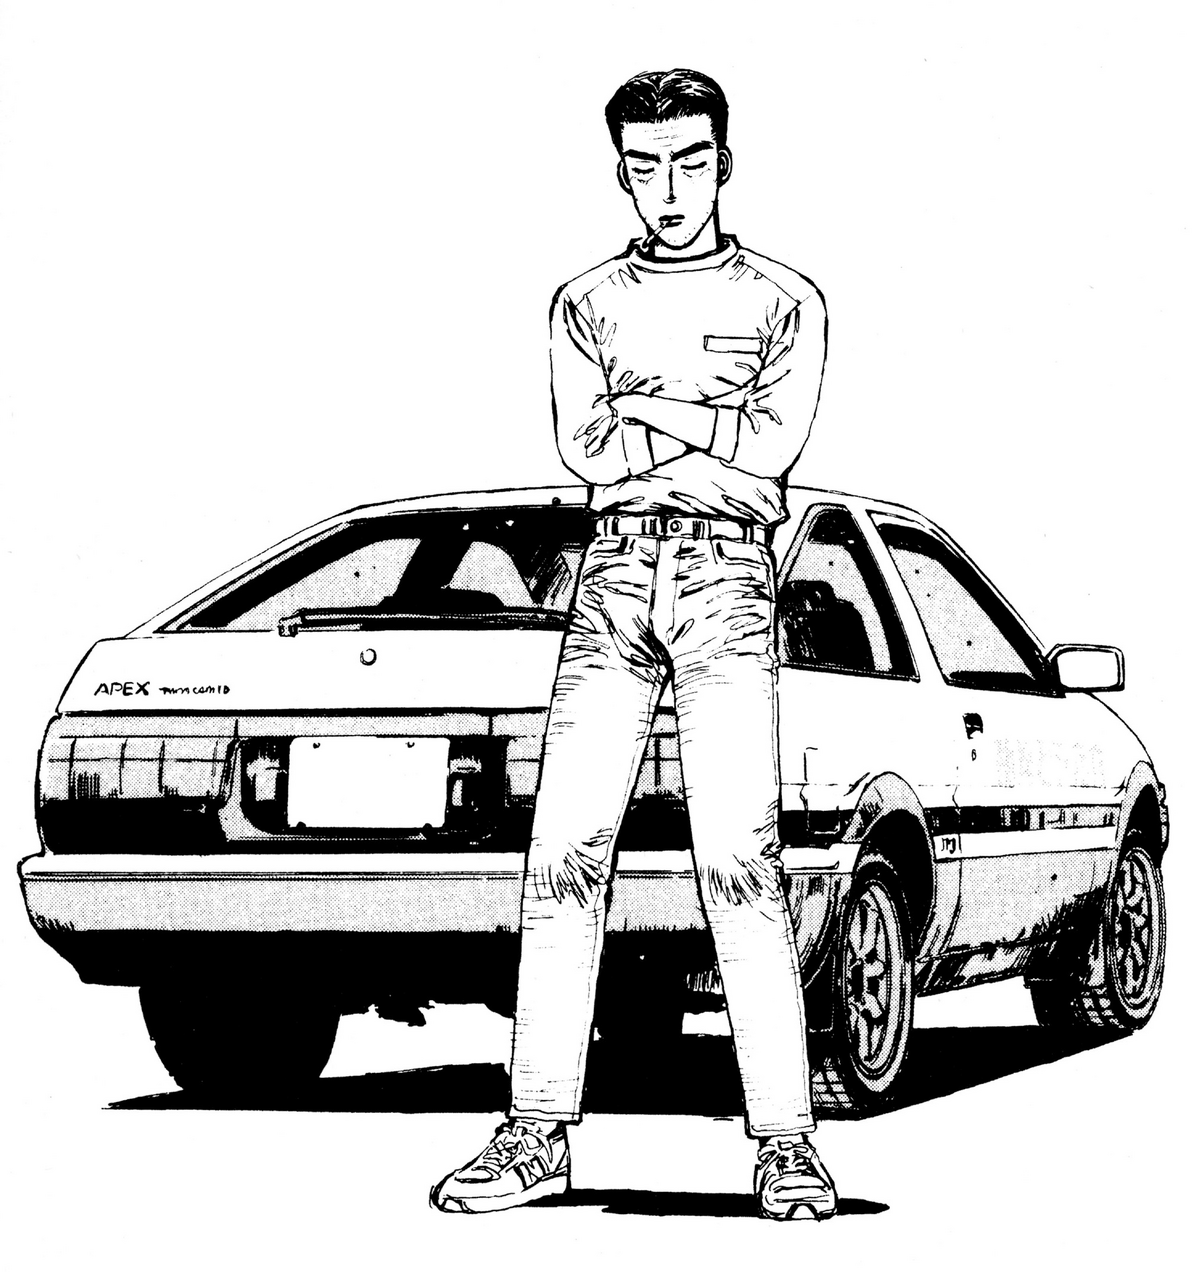 Initial D Fifth Stage, Initial D Wiki